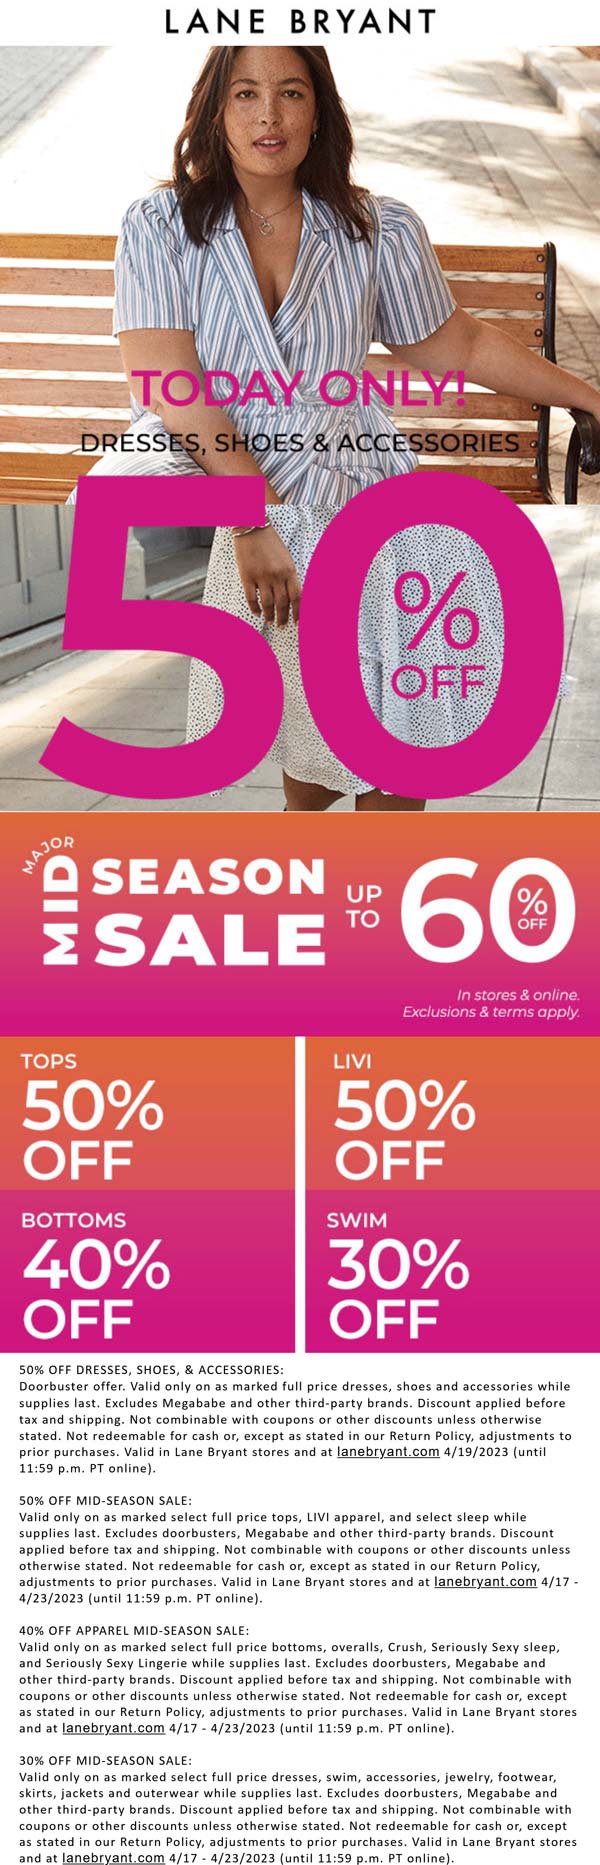 Lane Bryant stores Coupon  50% off dresses shoes & more today at Lane Bryant #lanebryant 